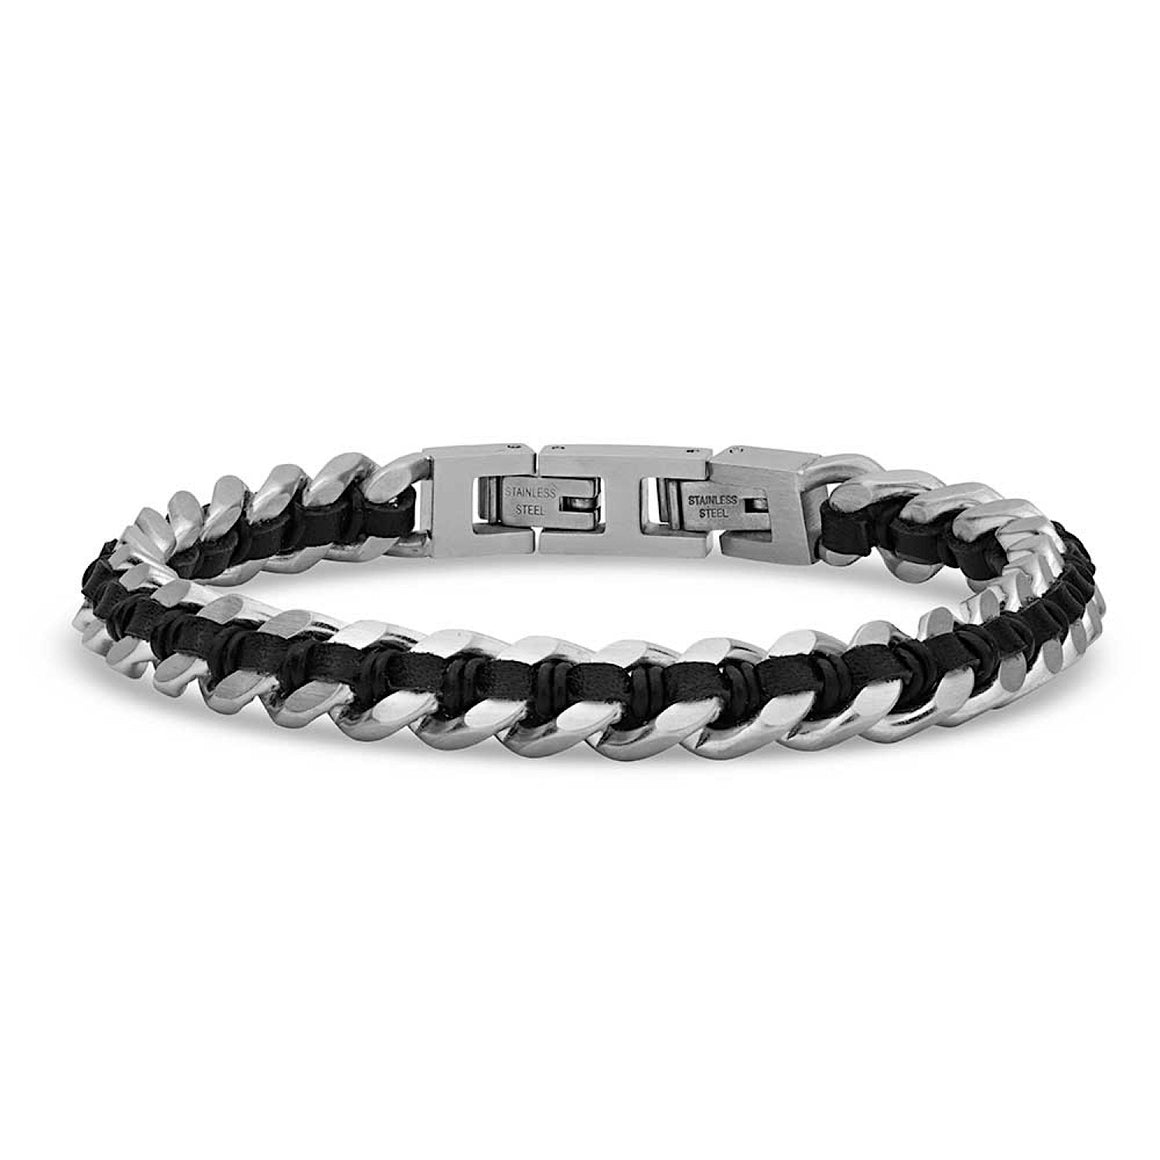 Wrapped In Leather Light Bracelet